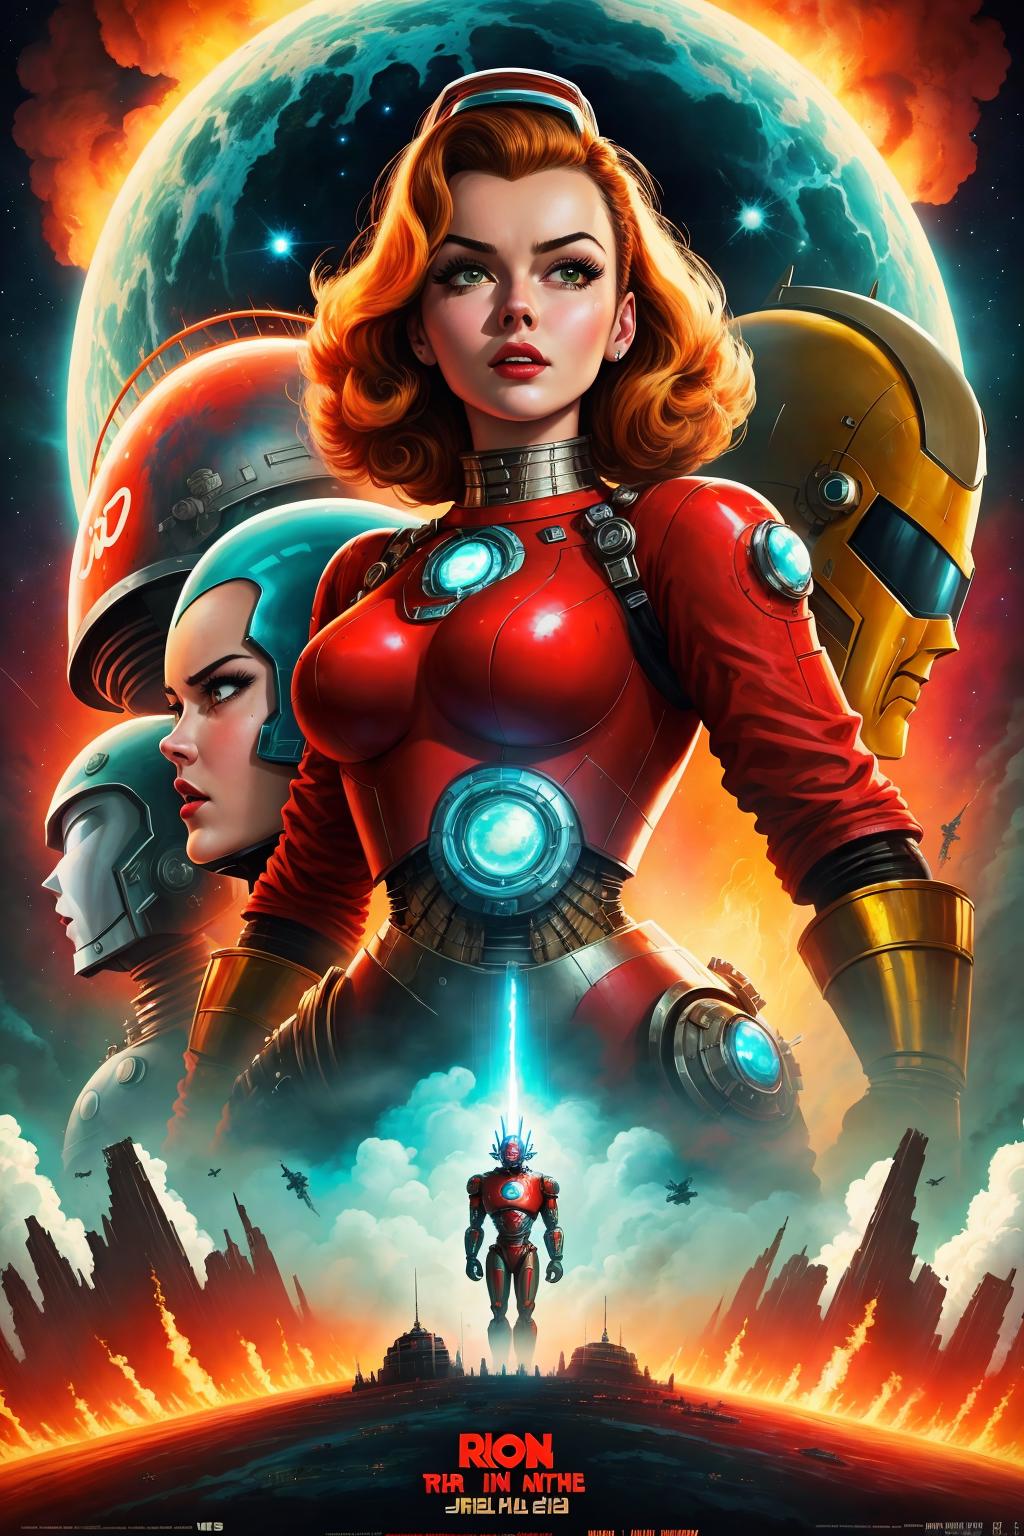 A comic book cover featuring a woman in a red costume and a man in a silver costume.